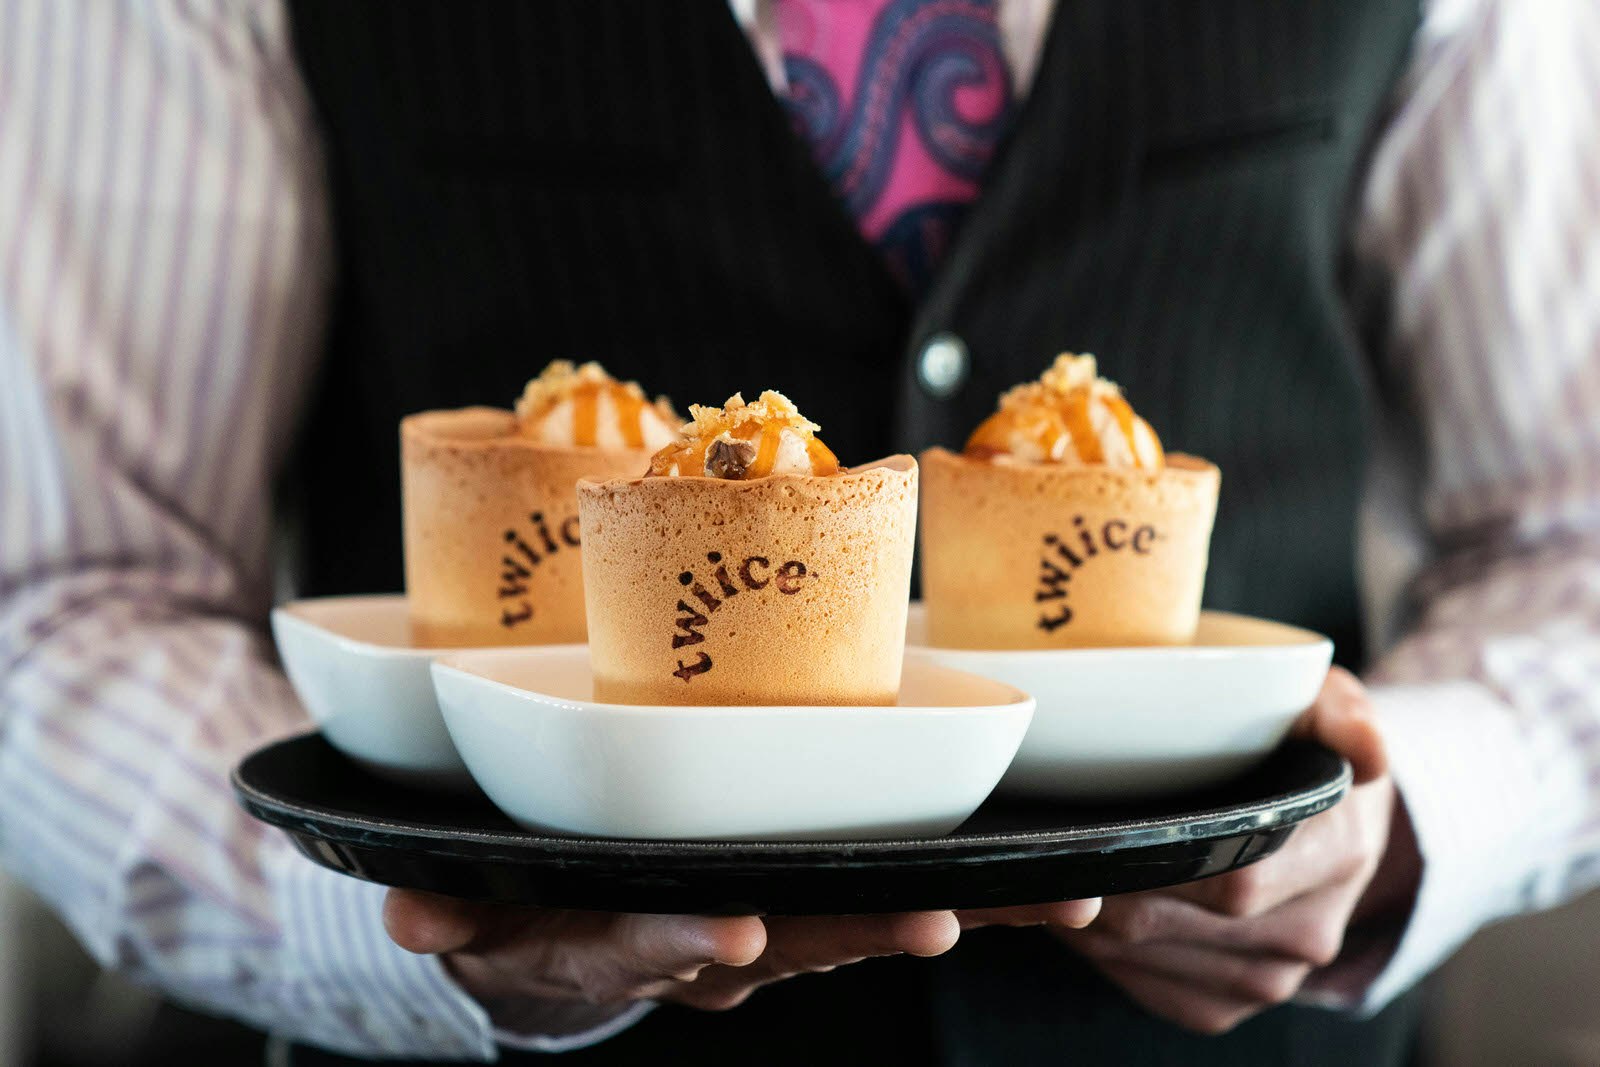 Three edible biscuit cups carried on a tray by someone wearing an Air New Zealand uniform. The biscuit cups are branded with the Twiice logo and have a whipped cream topping